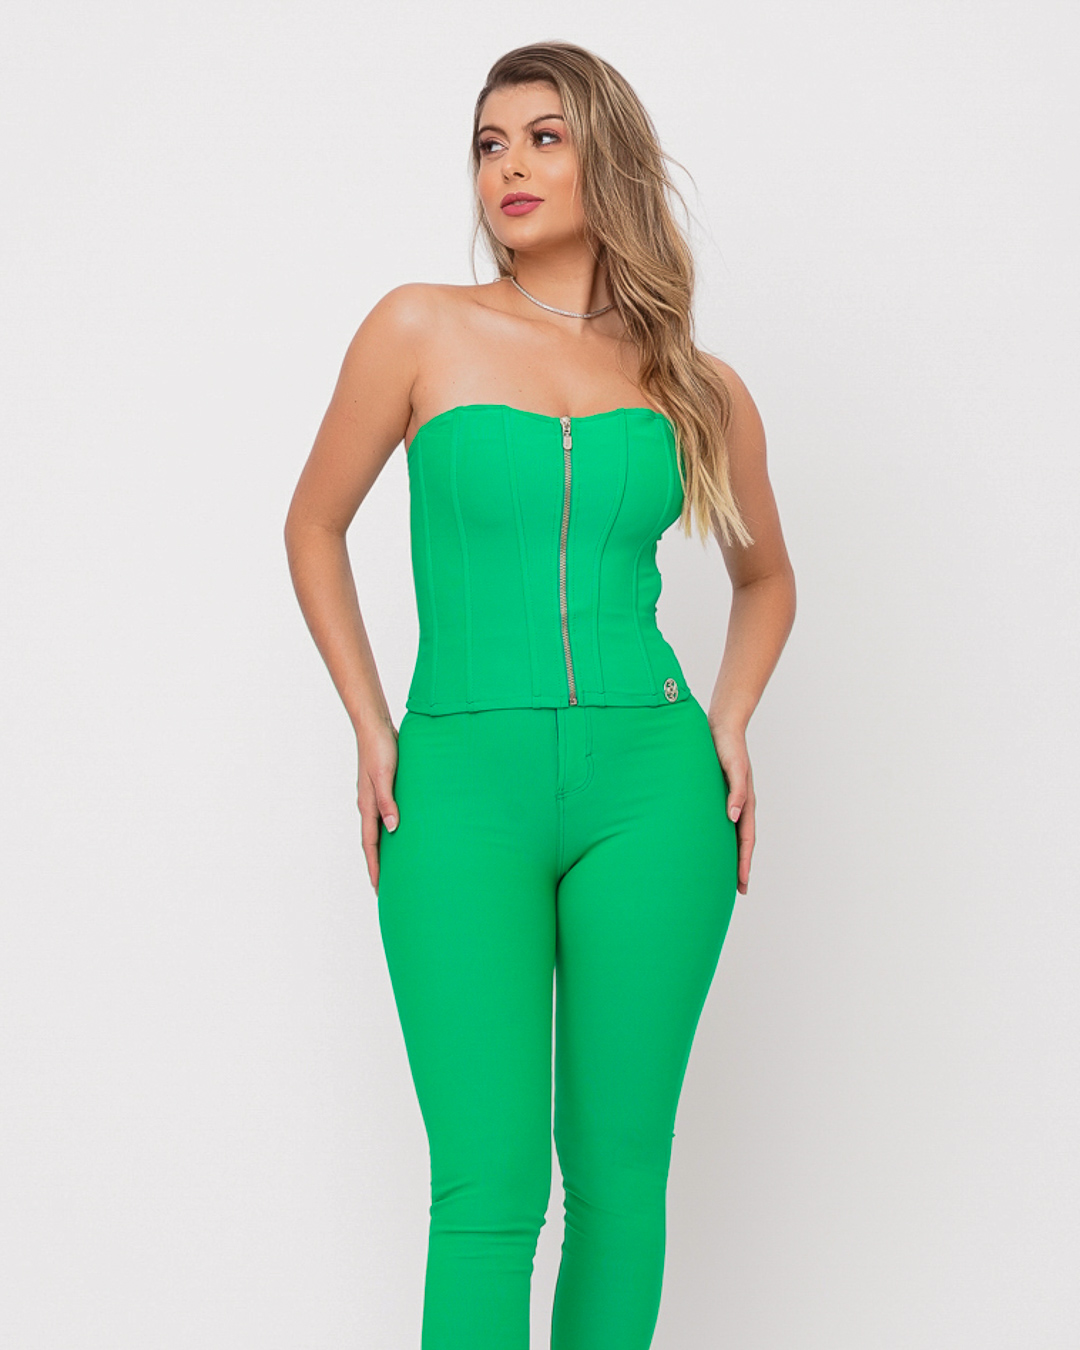 Fit You Corselet Miss Misses Com Barbatanas E Ziper Verde 18990023 Miss And Misses 